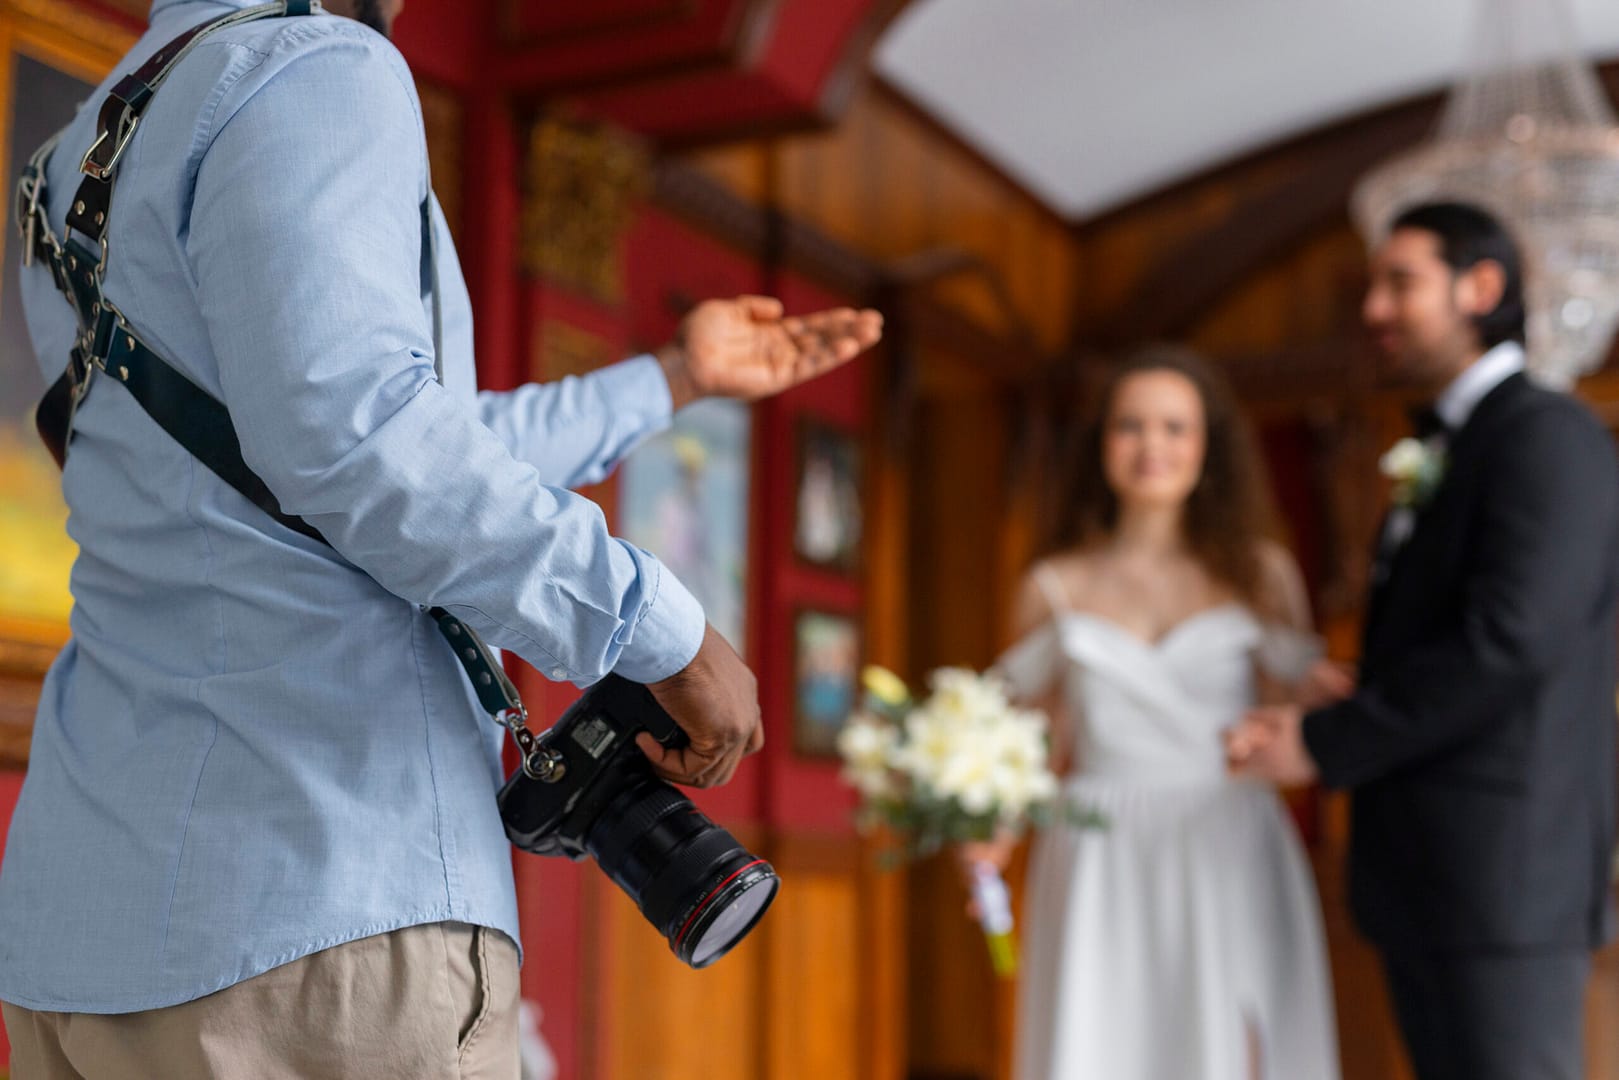 gimbals use in wedding